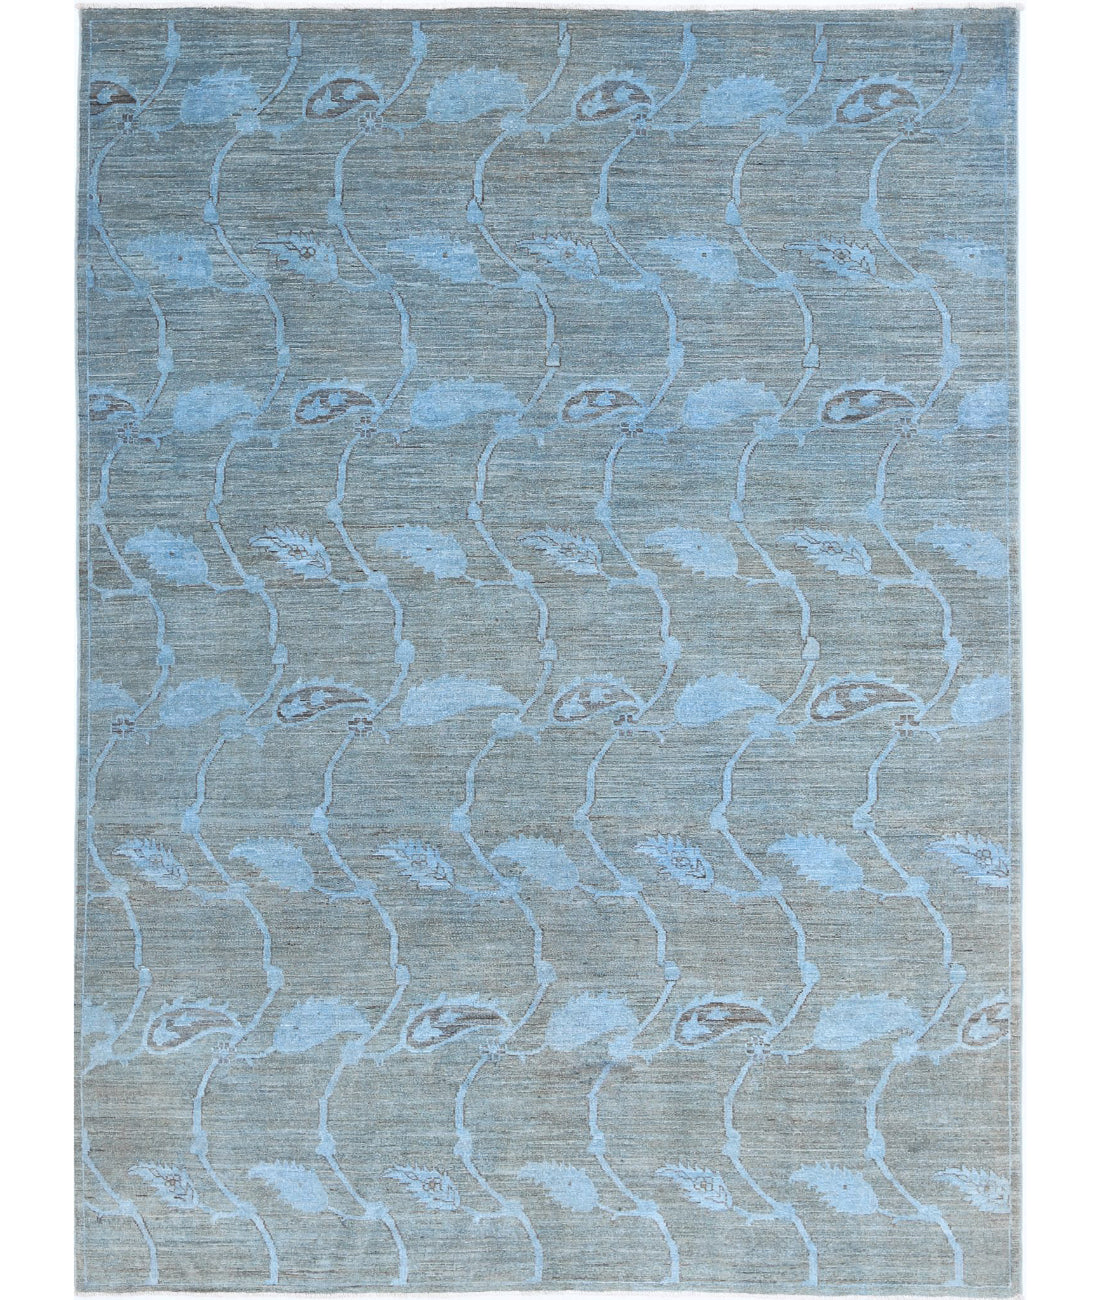 Hand Knotted Overdye Wool Rug - 5'11'' x 8'2'' 5'11'' x 8'2'' (178 X 245) / Blue / Blue